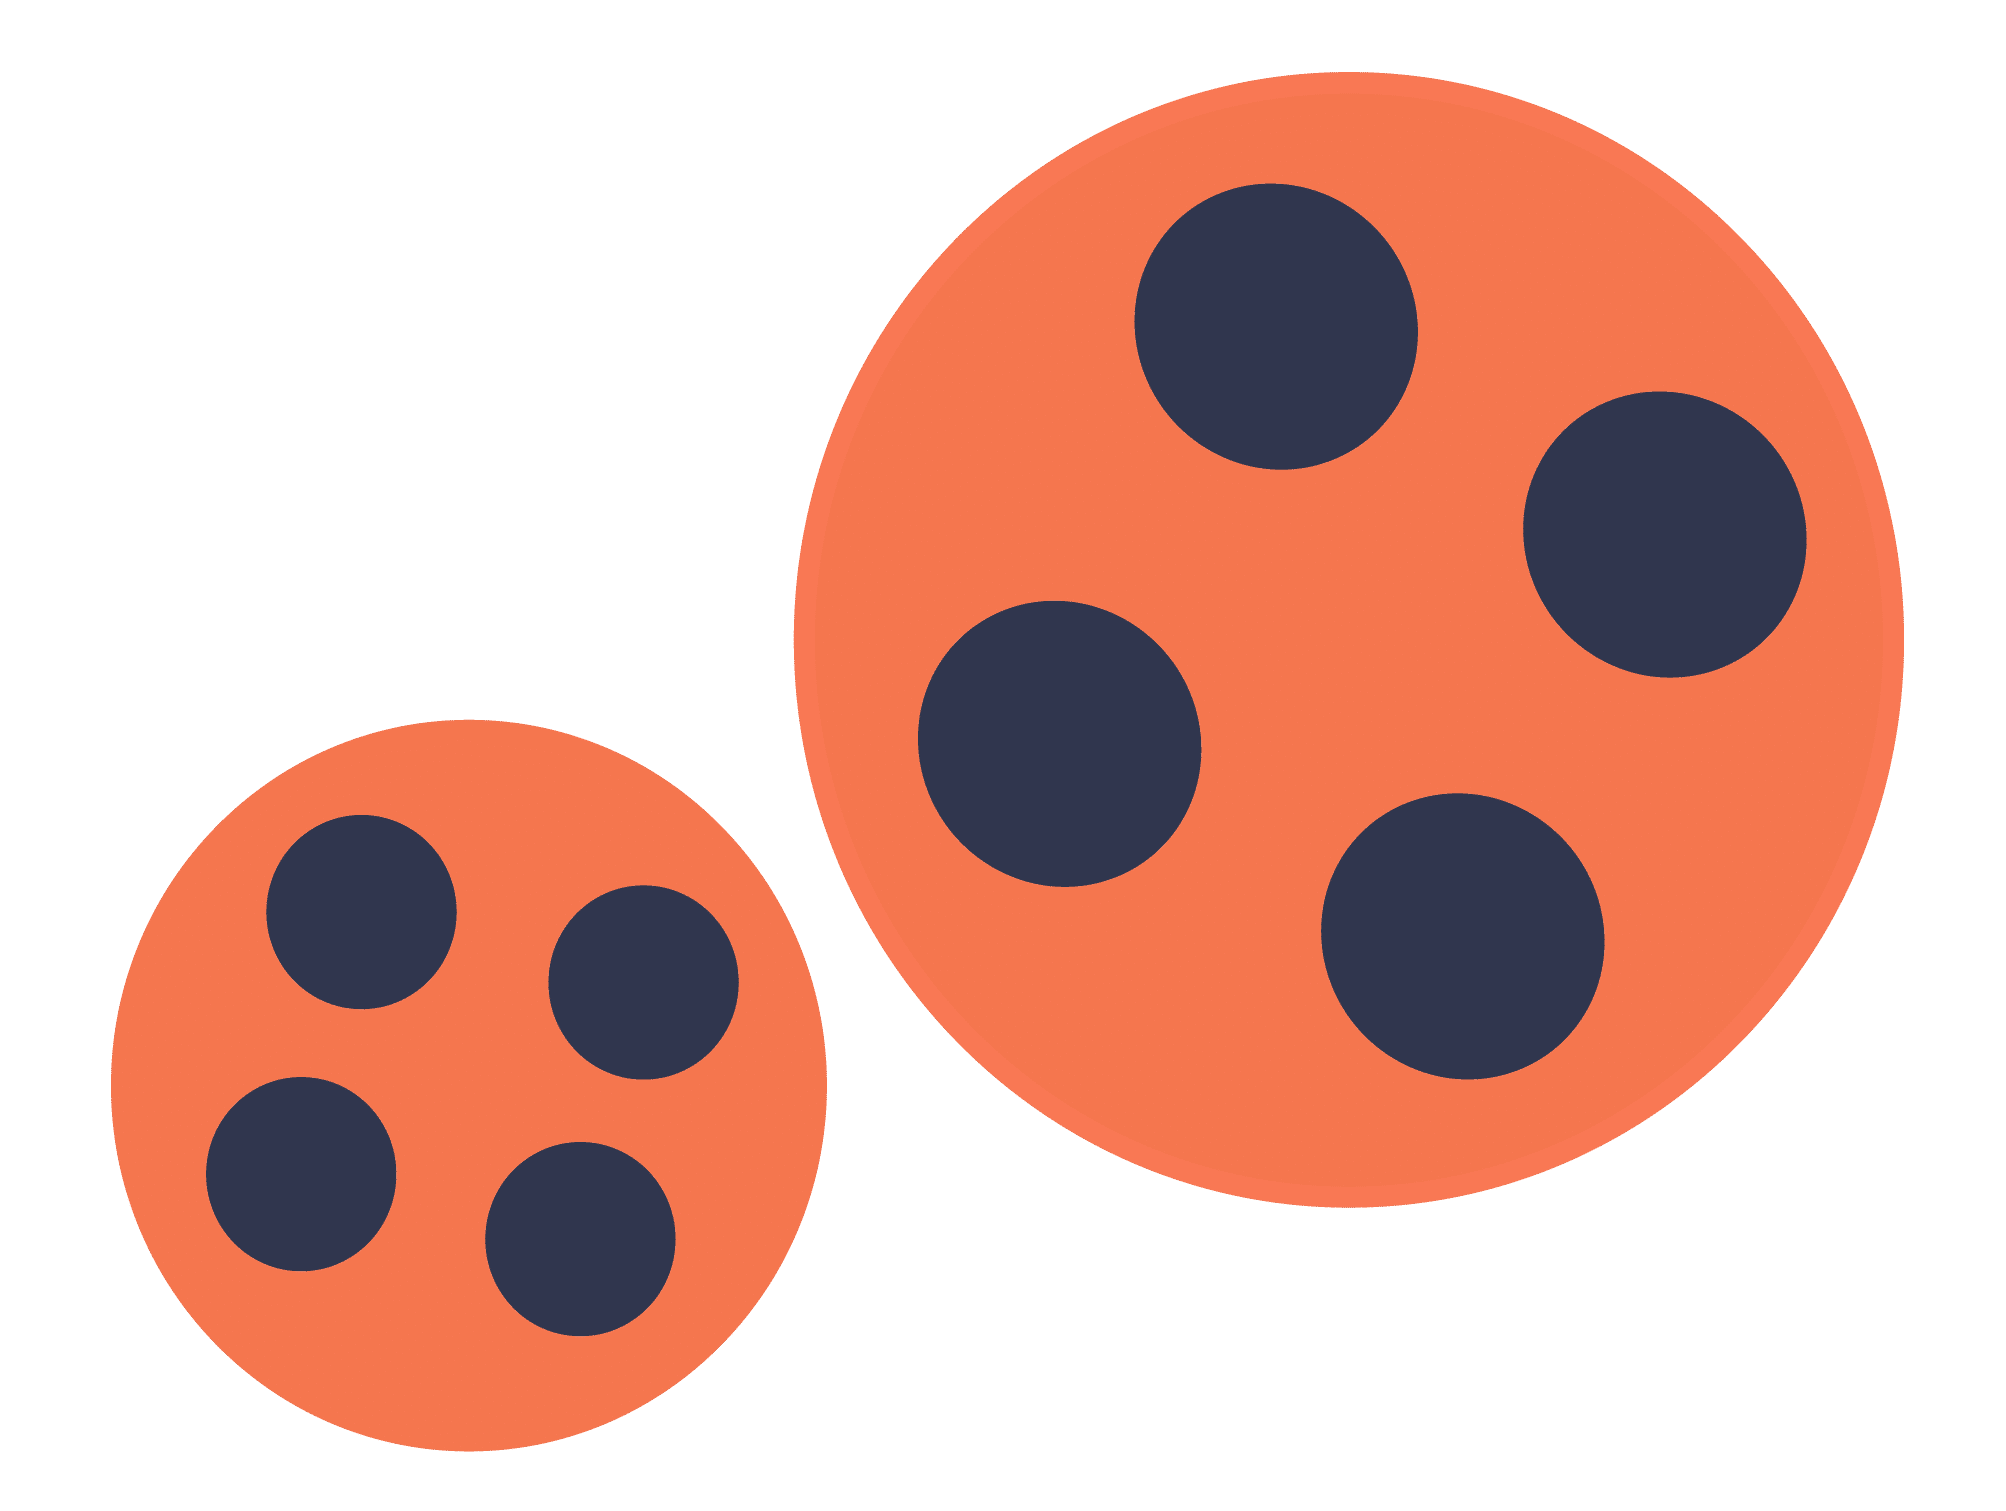 Two orange circles with four blue dots are an abstract image of a vintage video recorder.